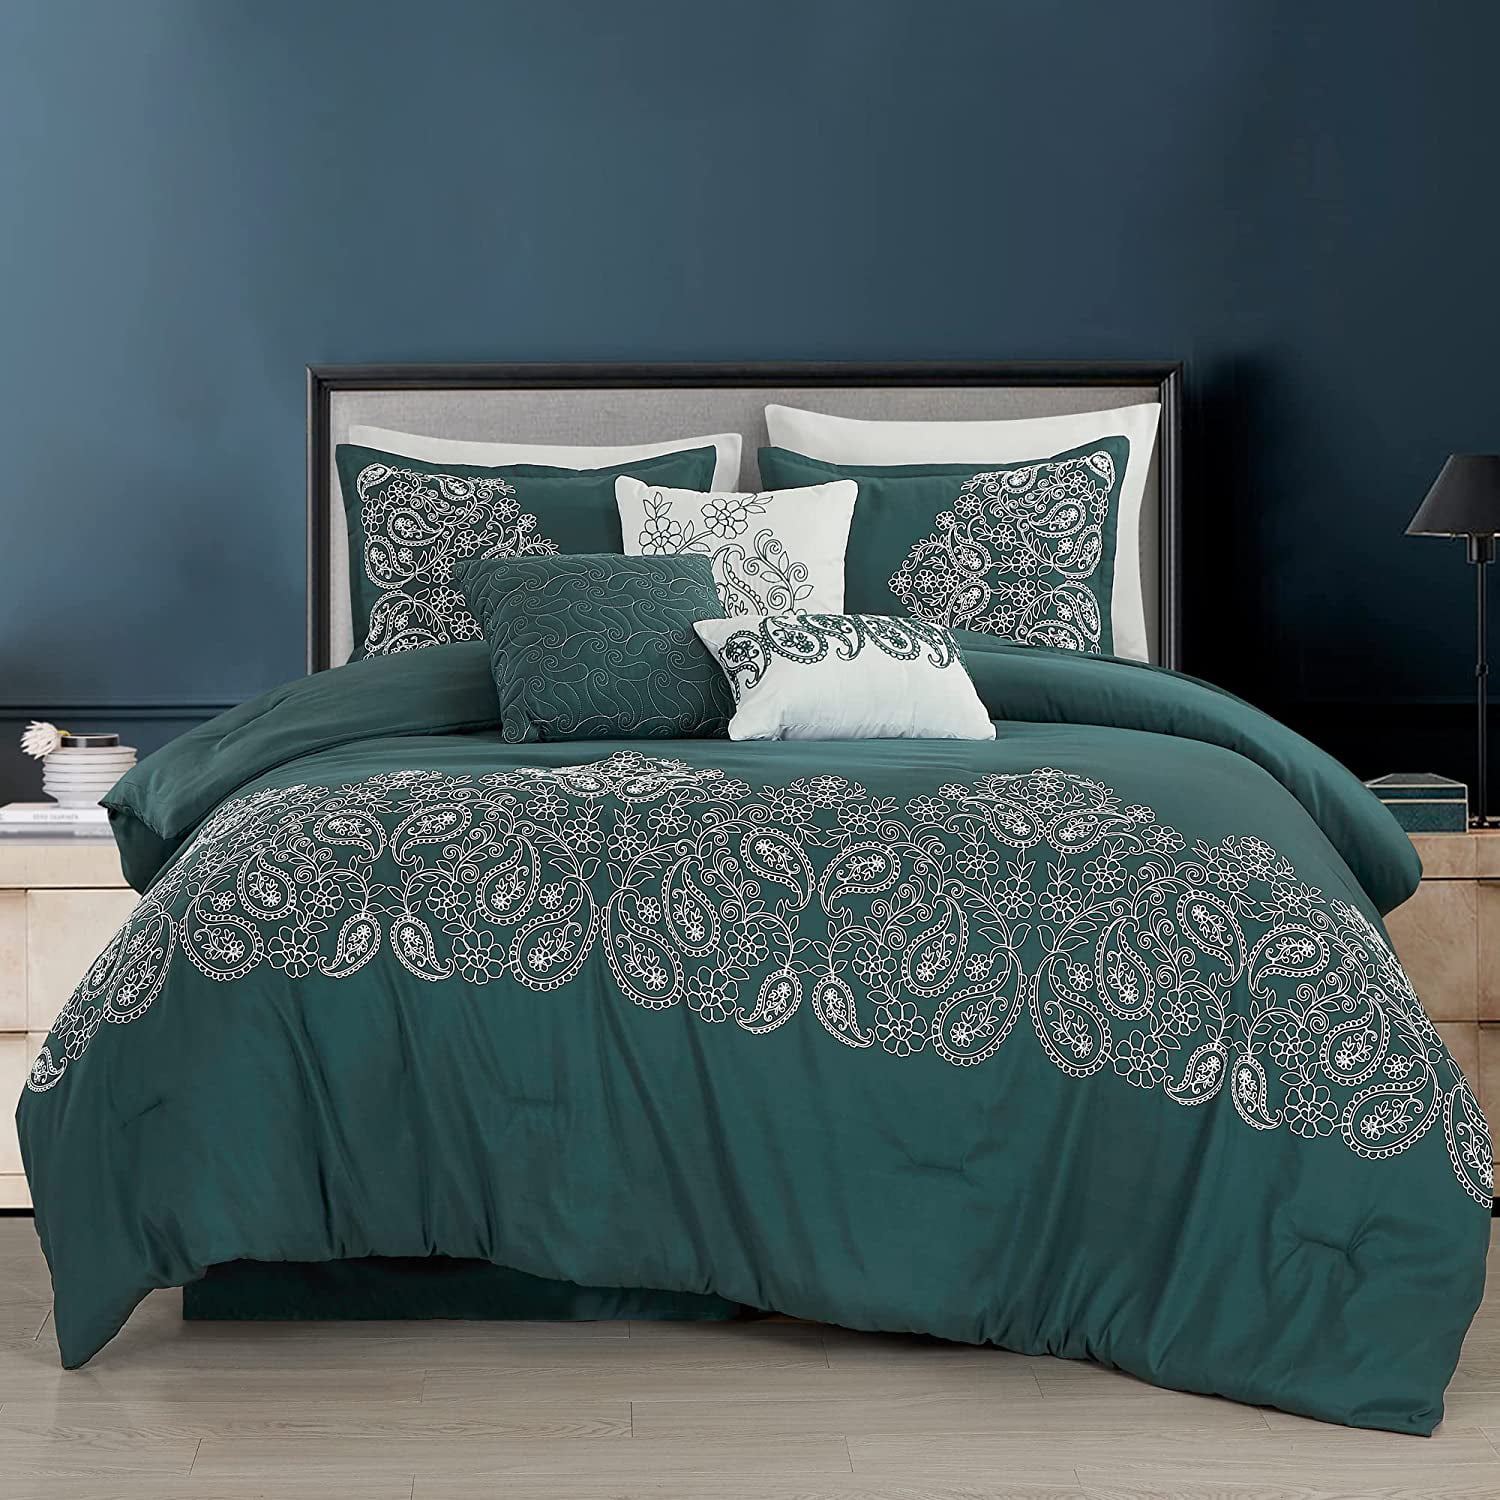 Linz 7-Piece Navy Blue White Embroidered Paisley Floral Scroll Comforter Set 